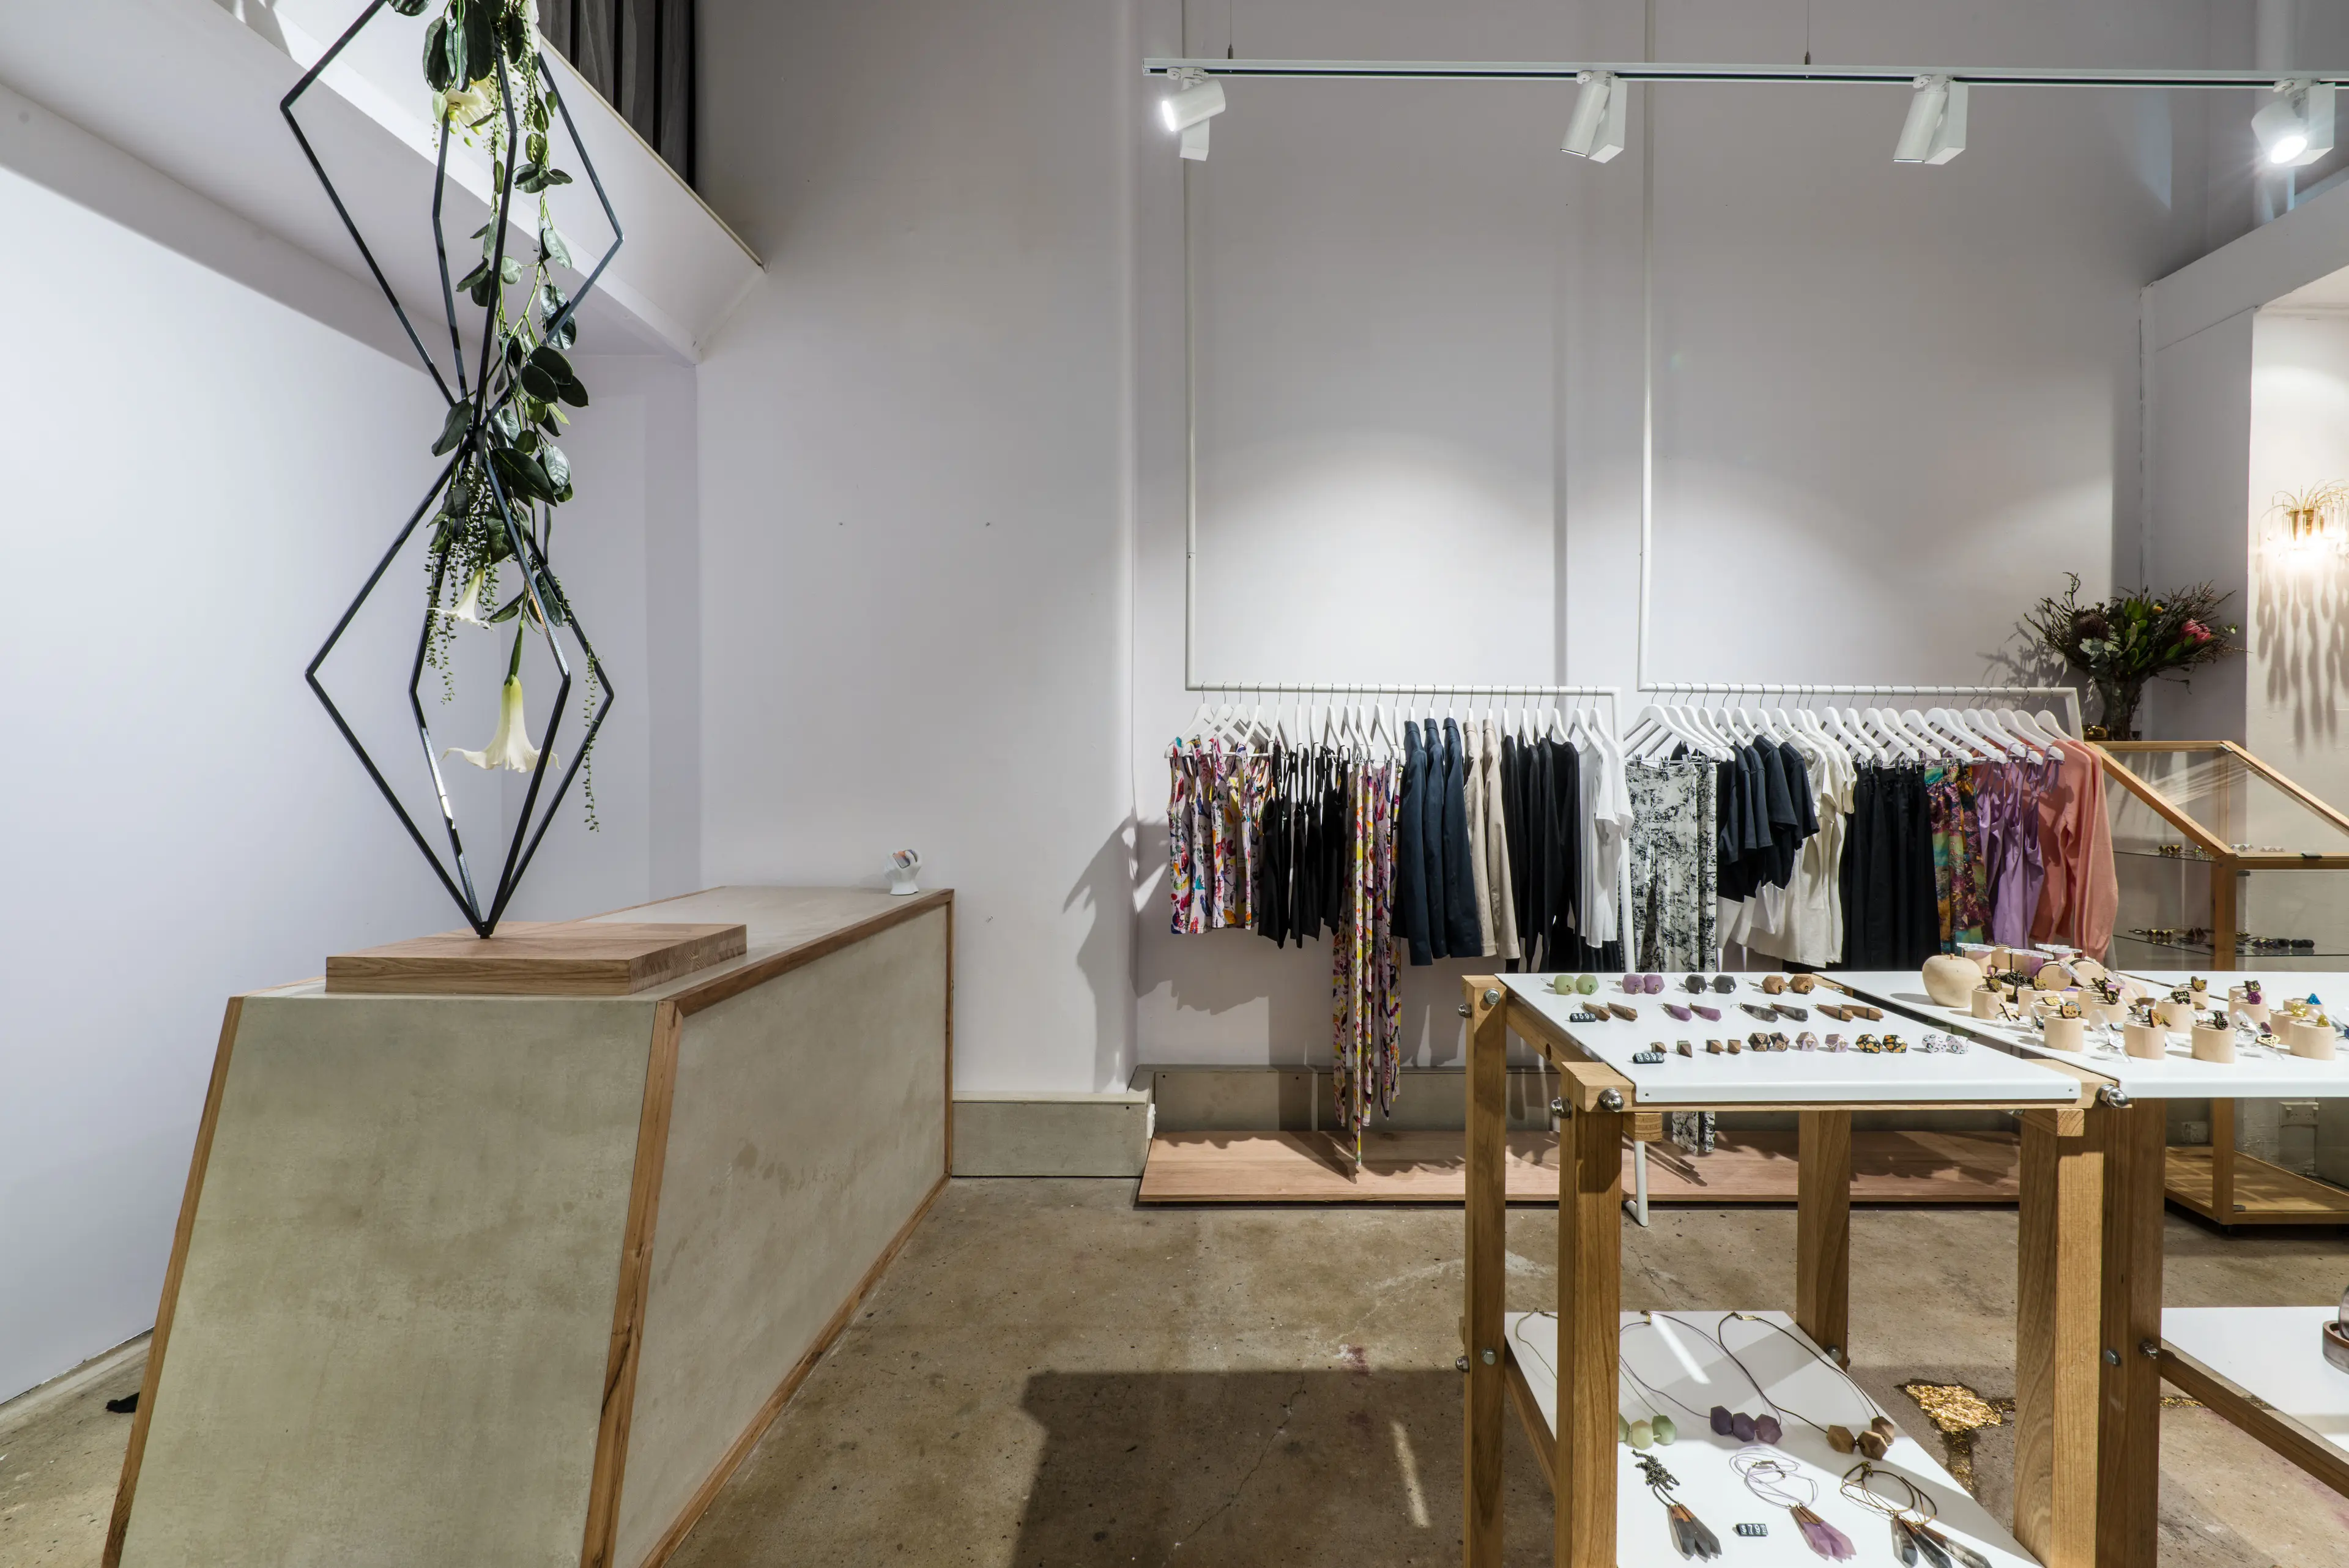 Limedrop - retail design, fabrication and fitout - Cathedral Arcade, Flinders Lane, Melbourne, Australia